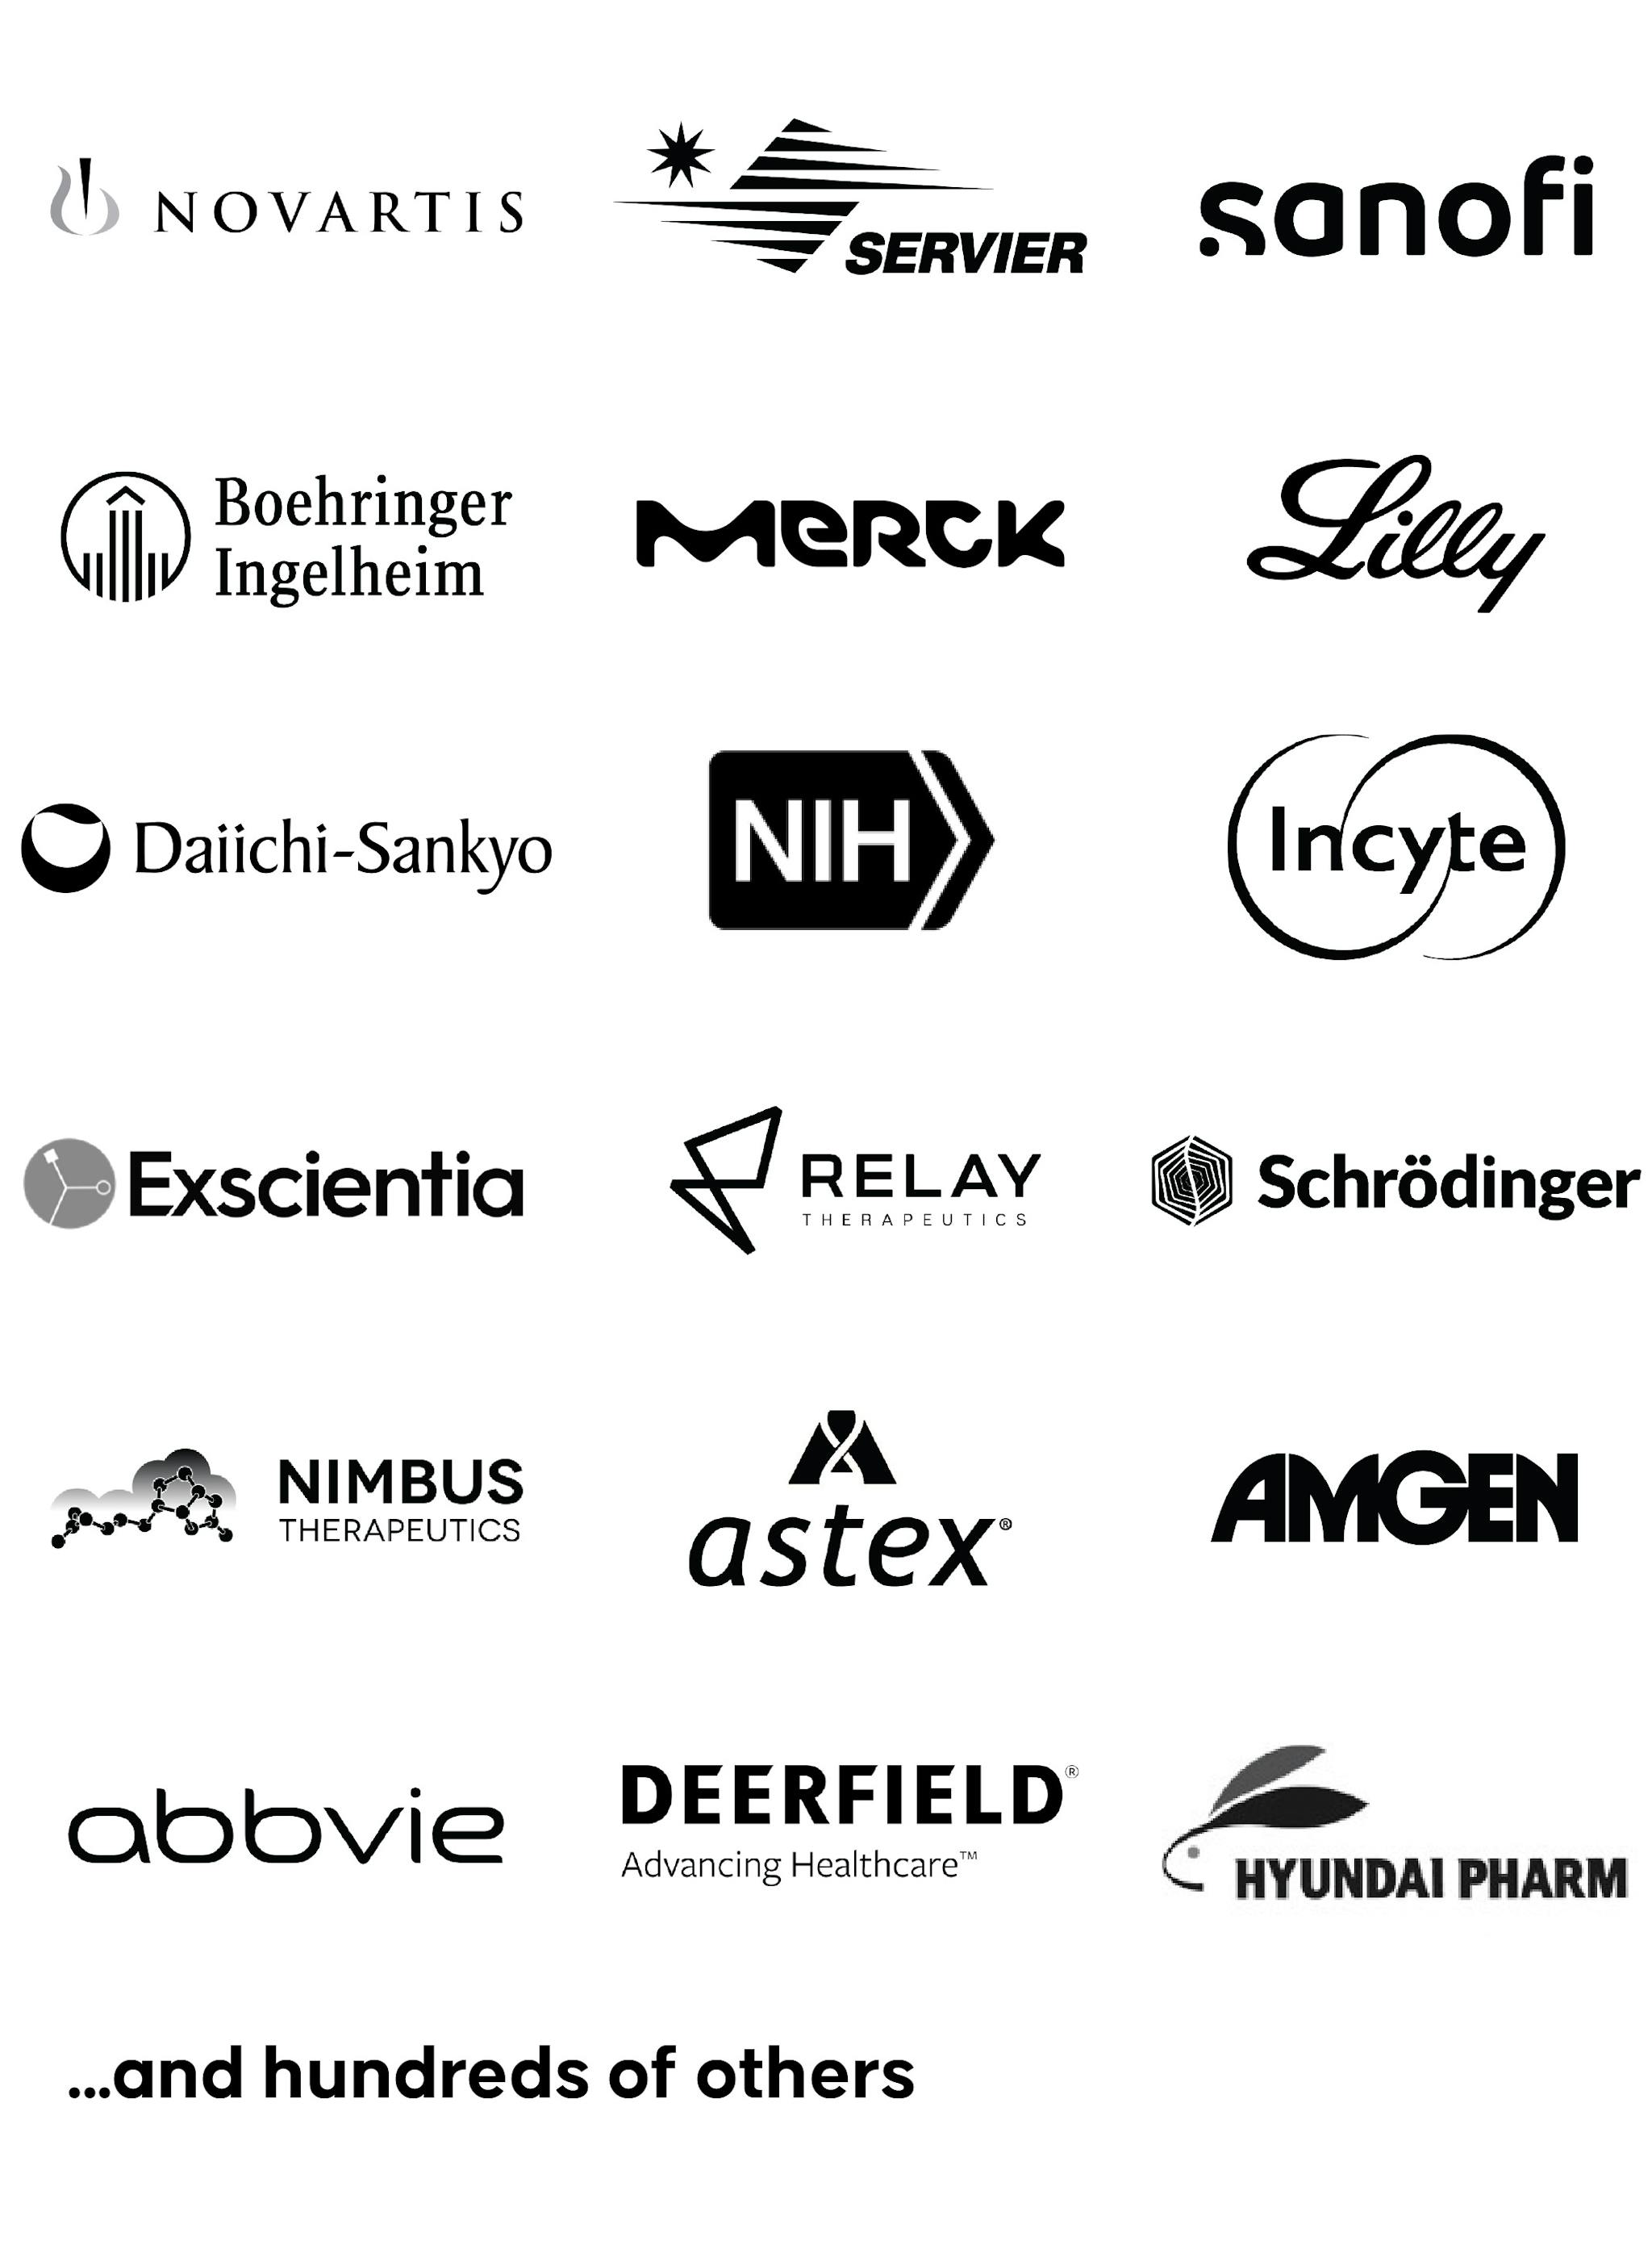 Logos of companies subscribed